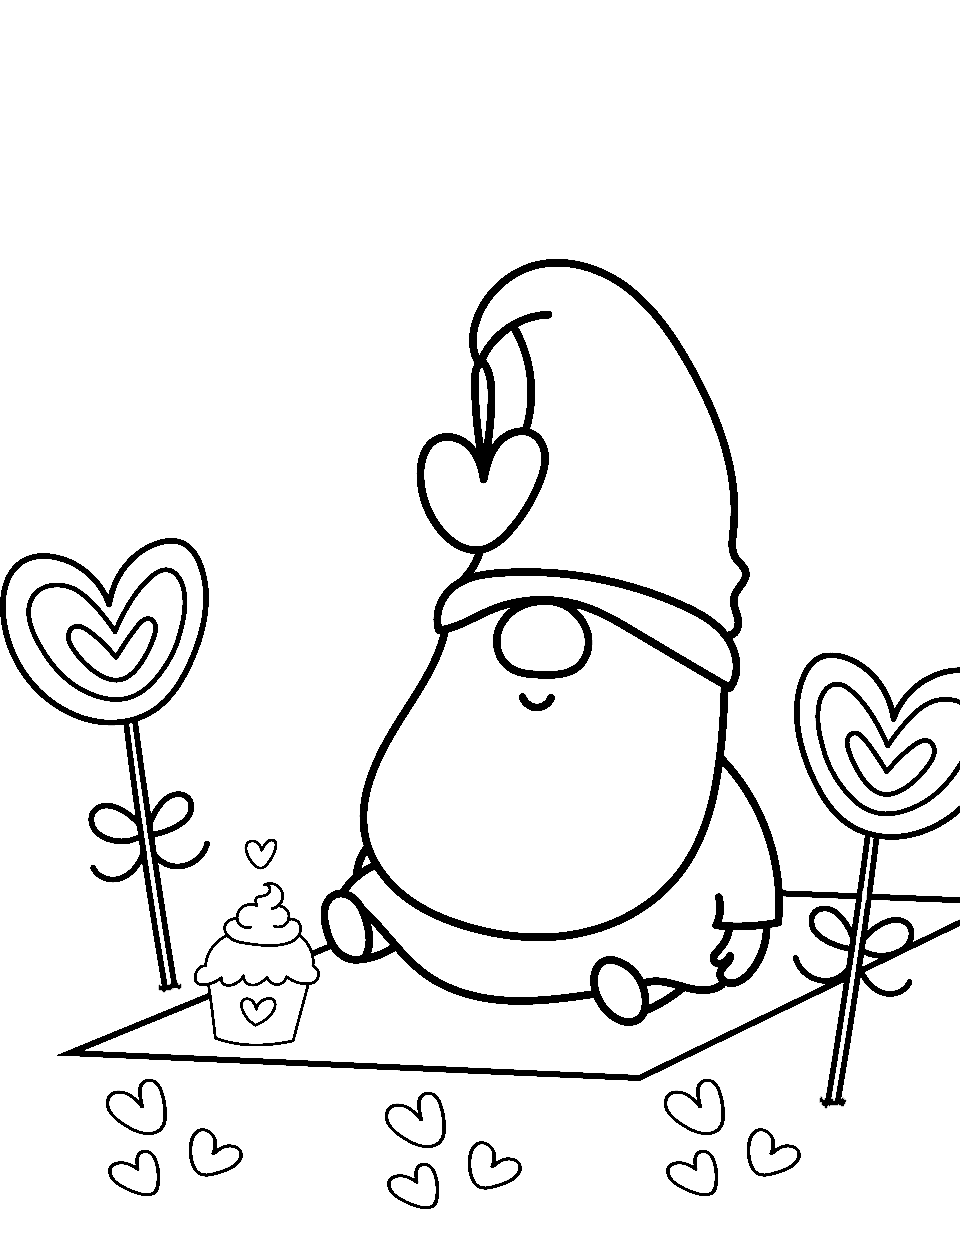 Gnome's Valentine Picnic Coloring Page - A gnome sitting on a blanket with heart toys all around celebrating Valentine’s Day.